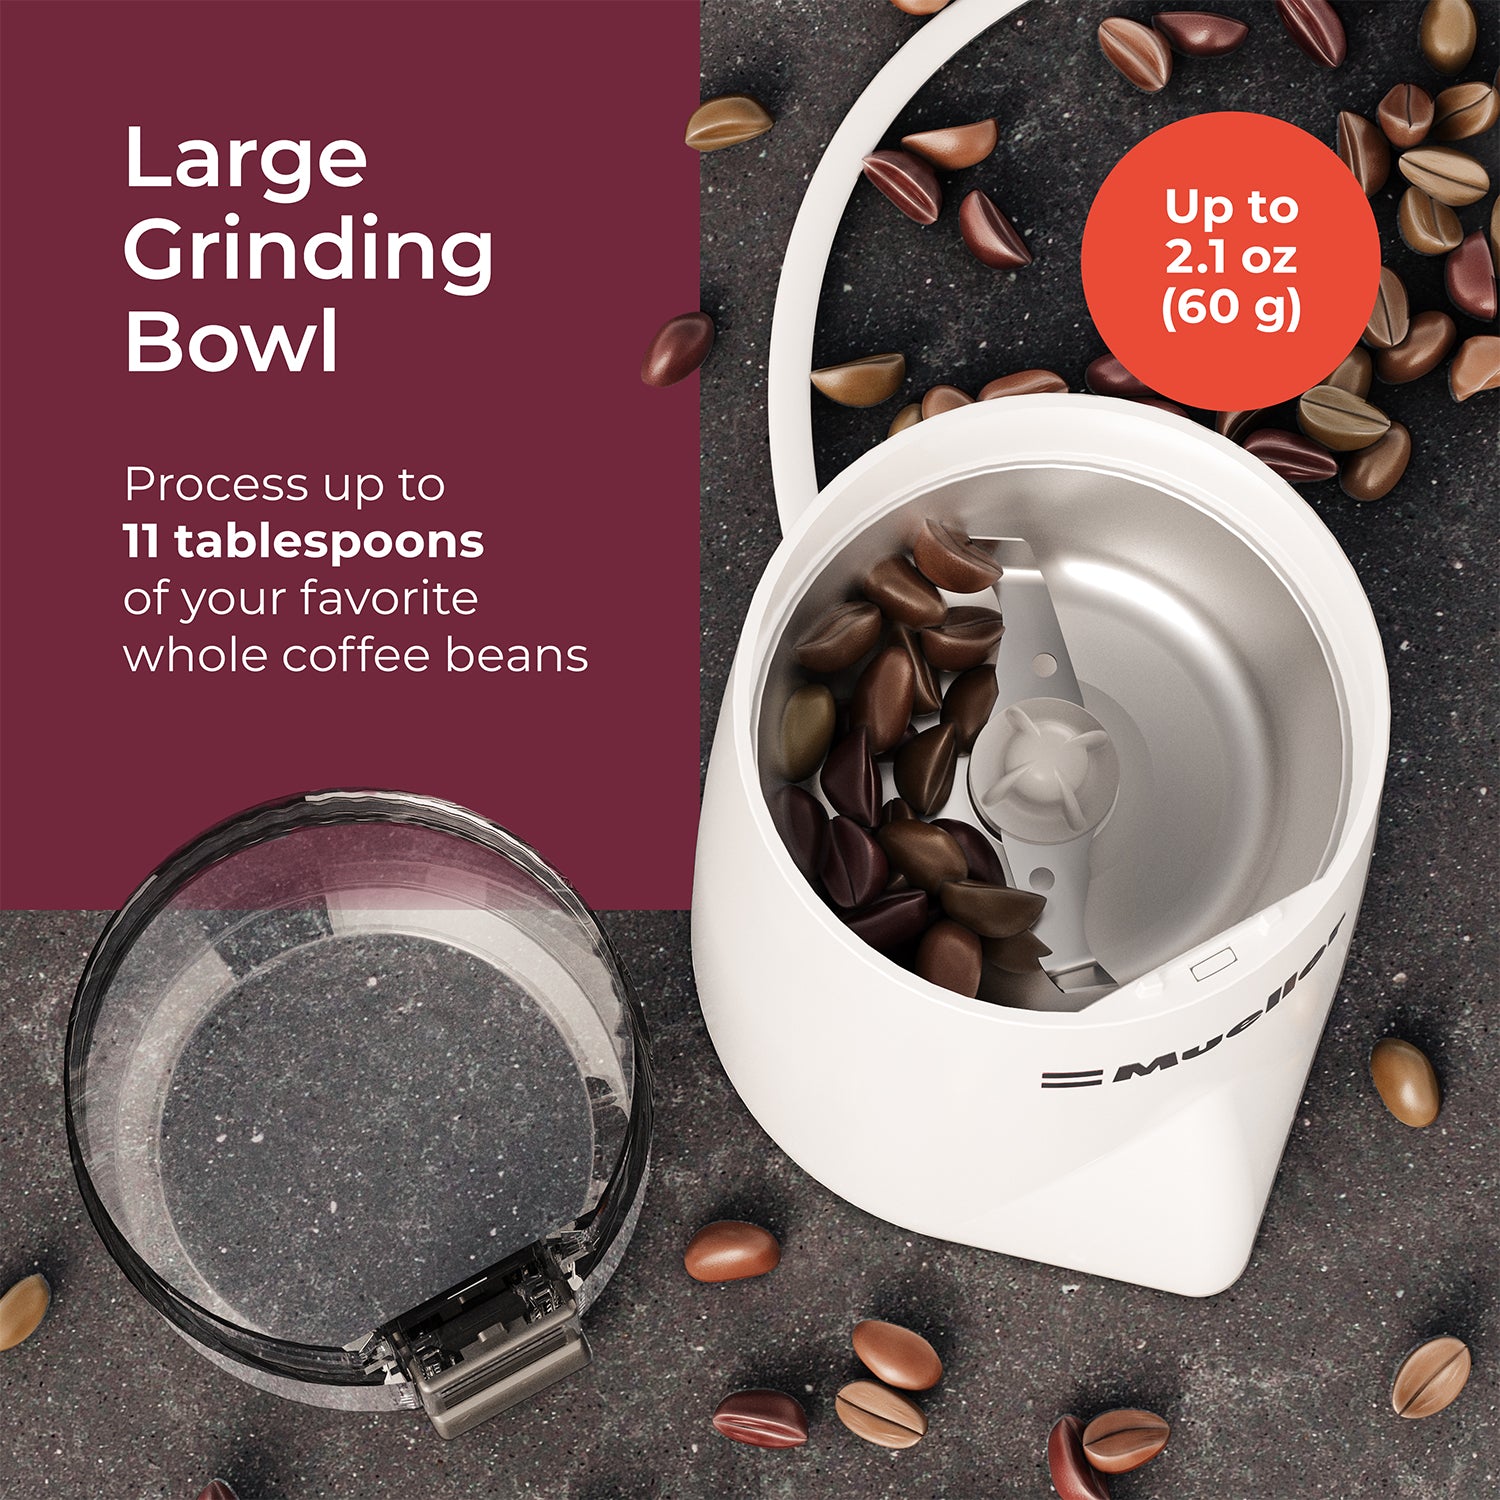 Spice & Coffee Grinder with One Touch Operation Transparent Lid